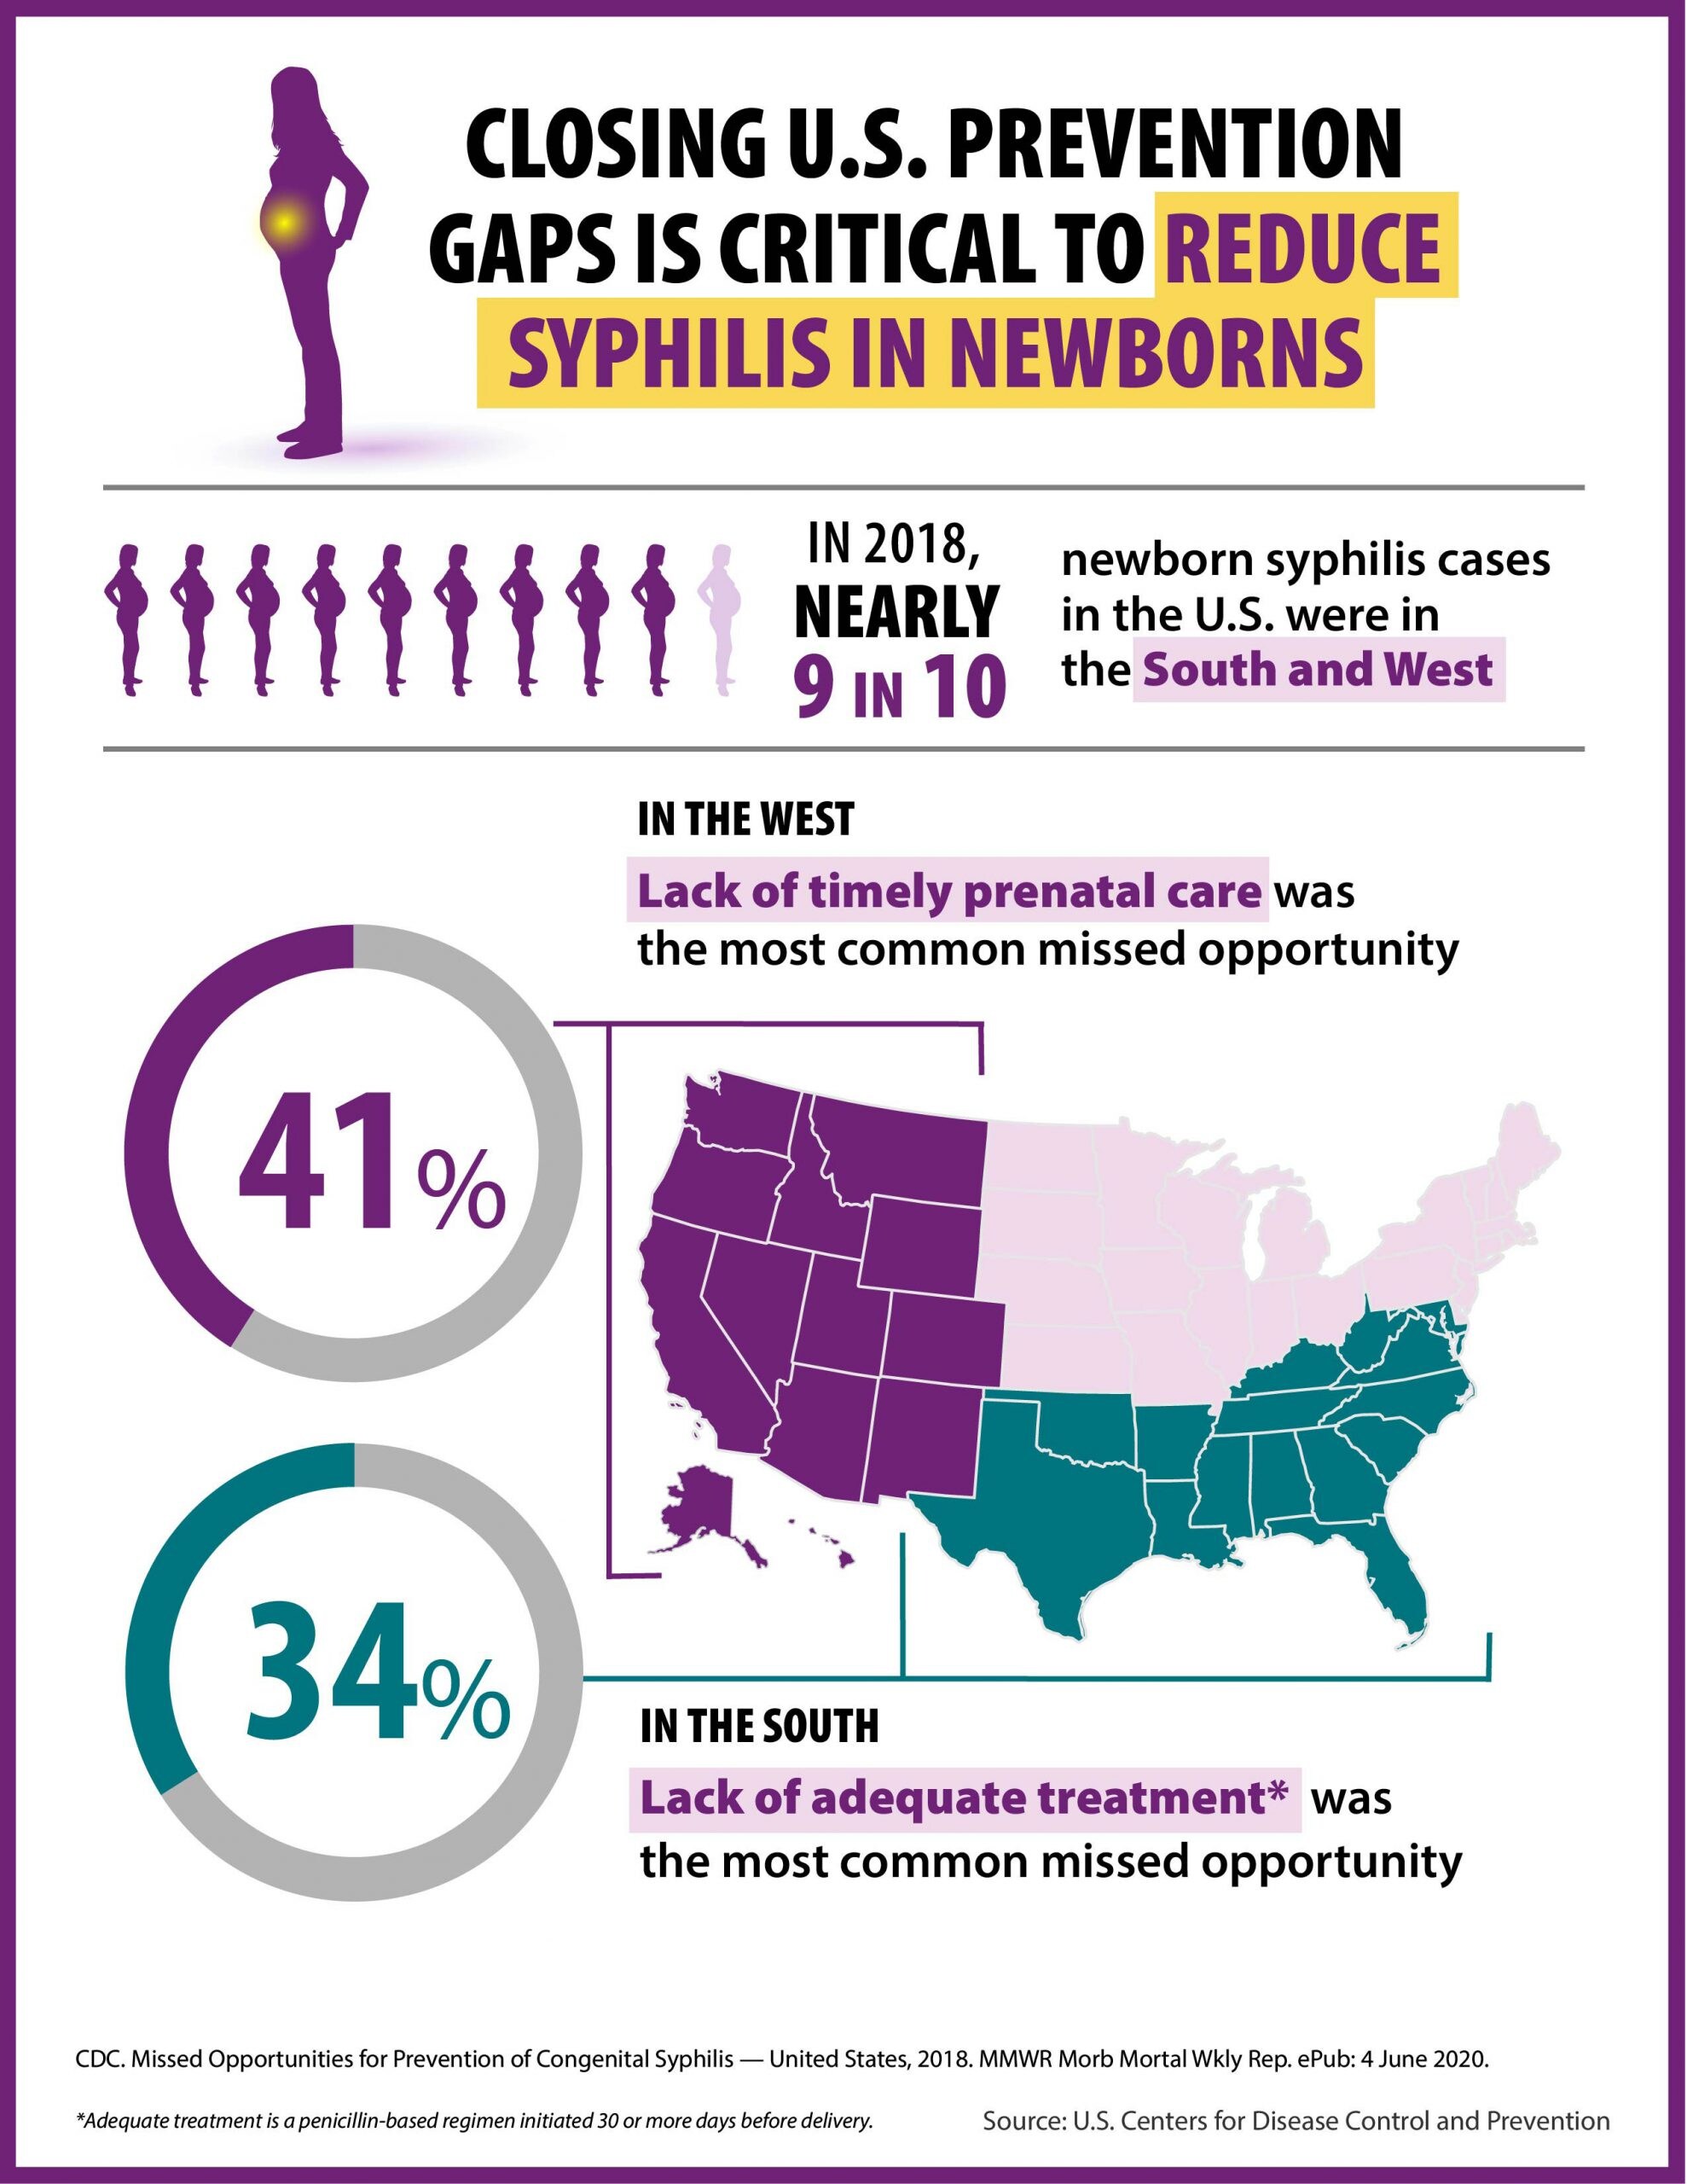 Closing U.S. Prevention gaps is critical to reduce syphilis in newborns
In 2018, nearly 9 in 10 newborn syphilis cases in the U.S. were in the South and West
41% - In the West
Lack of timely prenatal care was the most common missed opportunity
34% - In the South
Lack of adequate treatment was the most common missed opportunity
Adequate treatment is a penicillin-based regimen initiated 30 or more days before delivery
Source; U.S. Centers for Disease Control and Prevention
